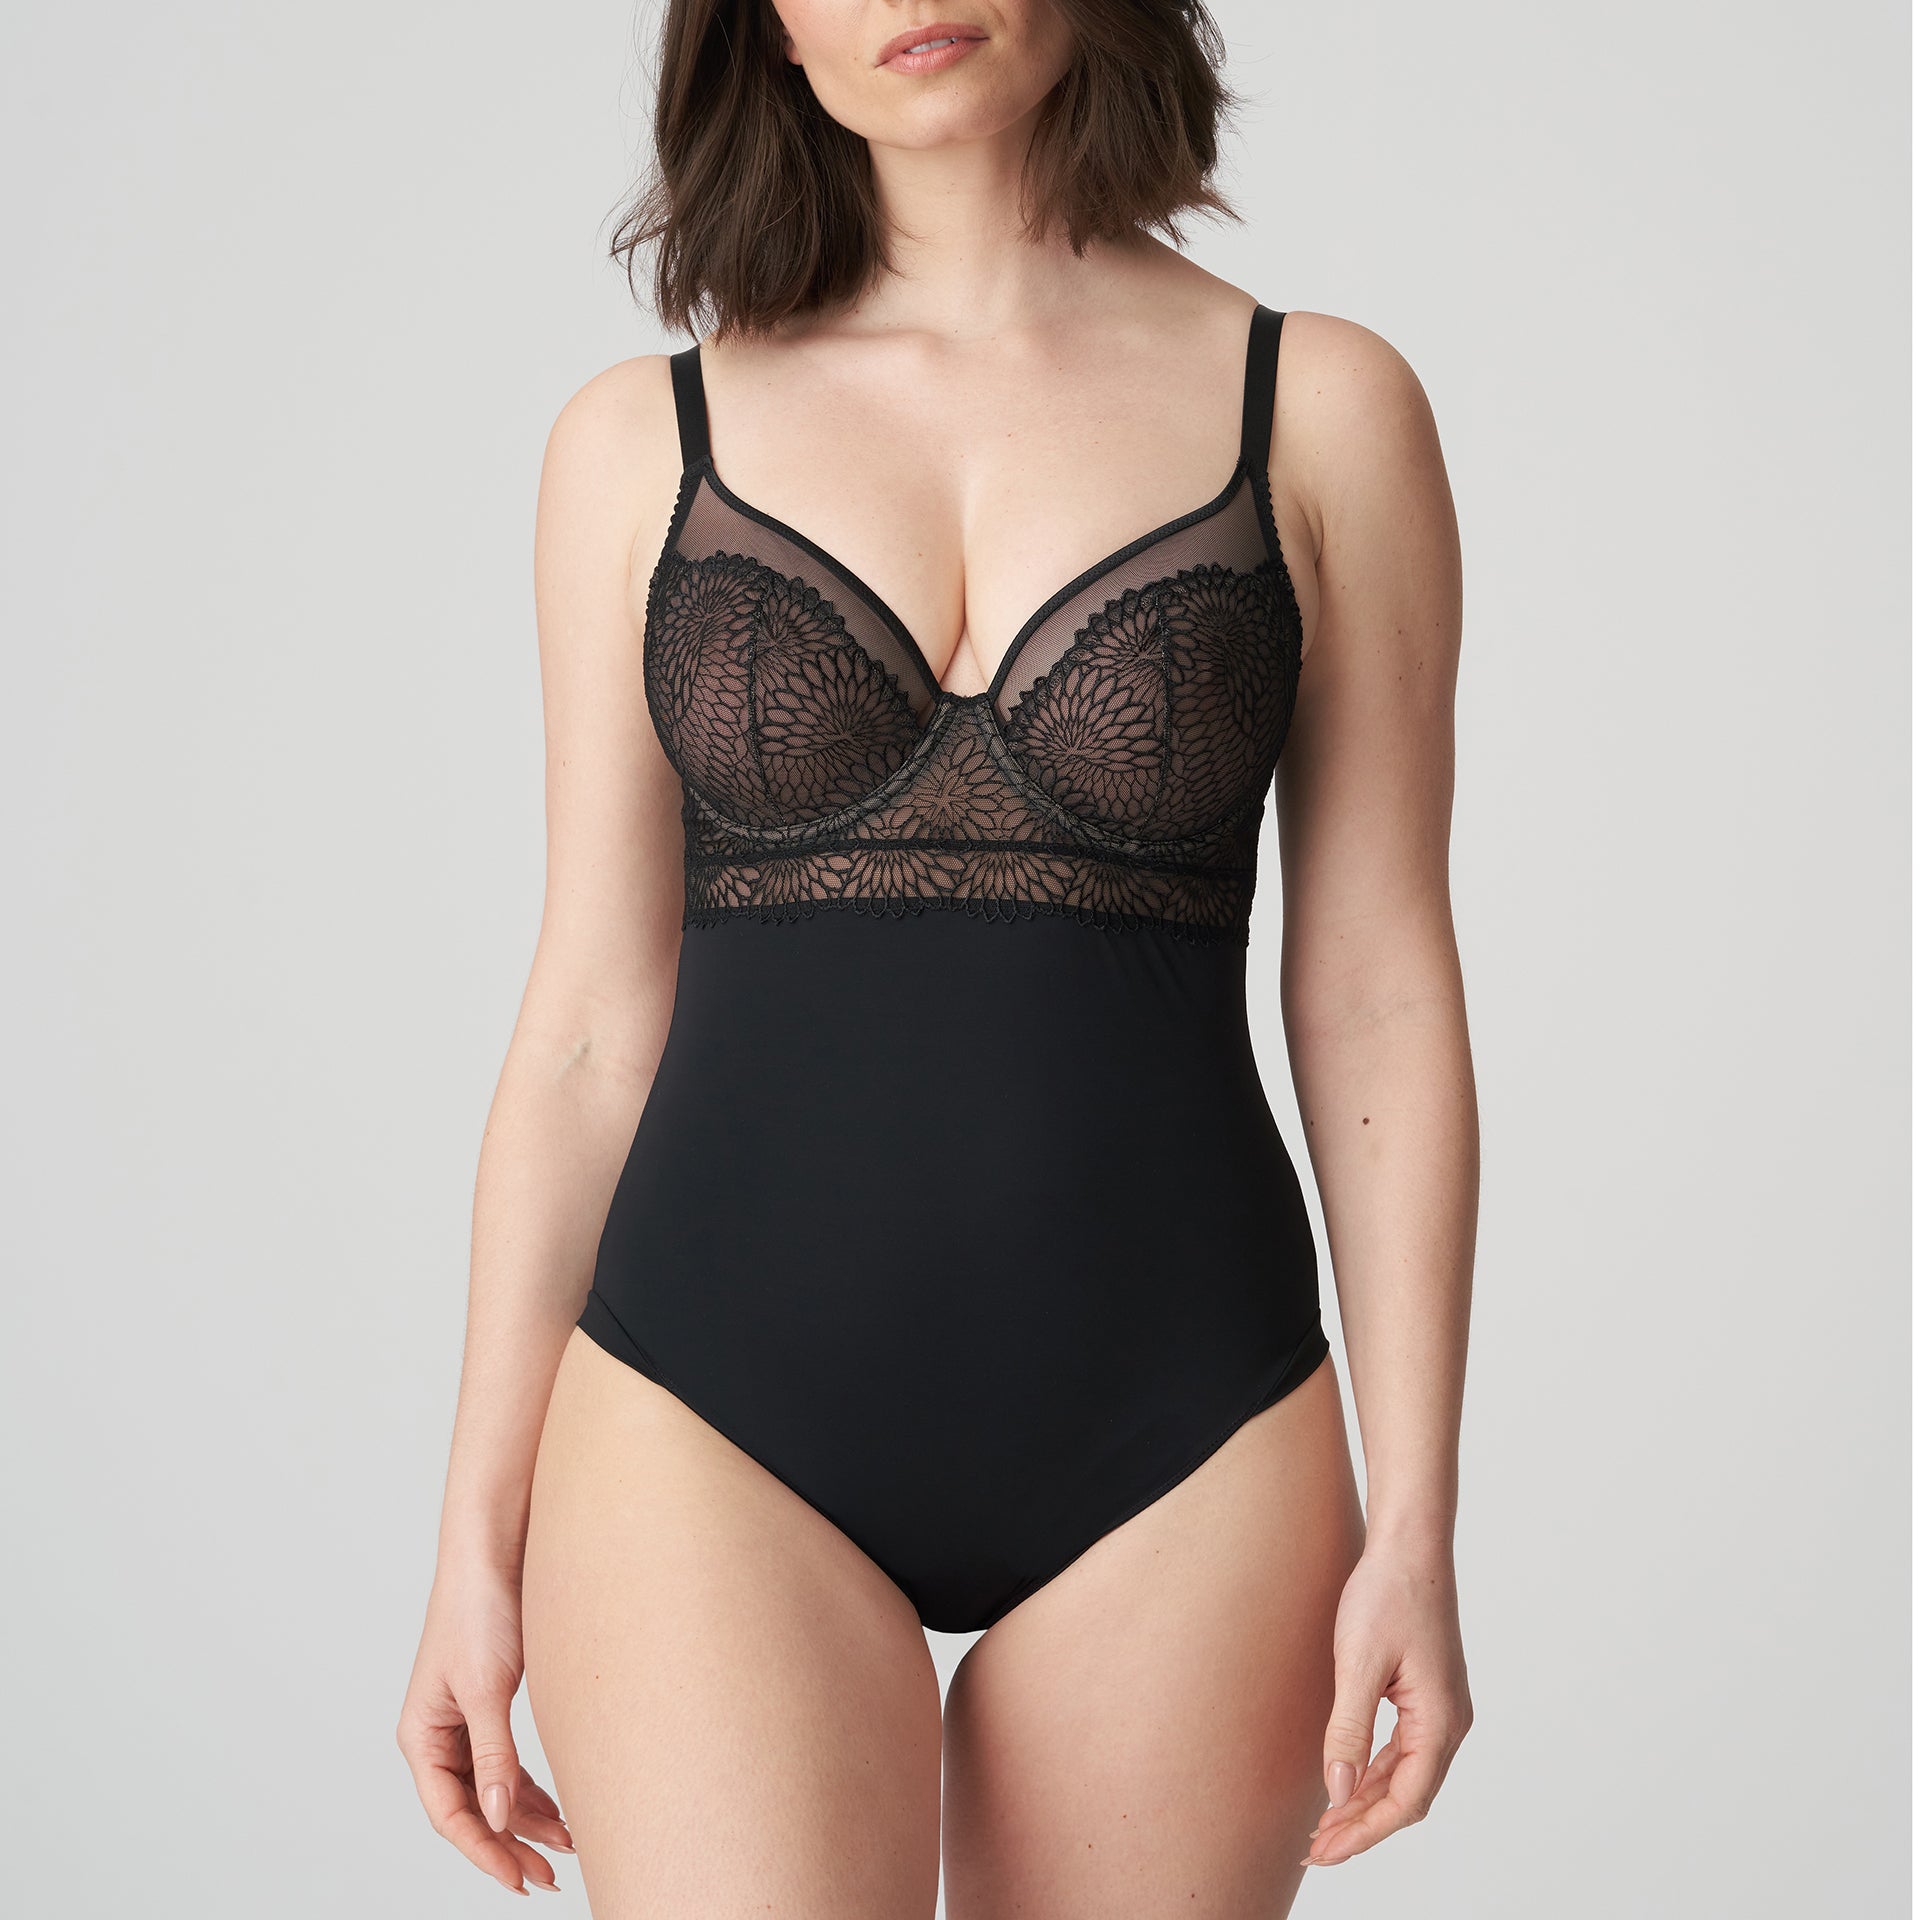 Woman wearing a black DD+ open back bodysuit with built in full support underwire bra by Primadonna.